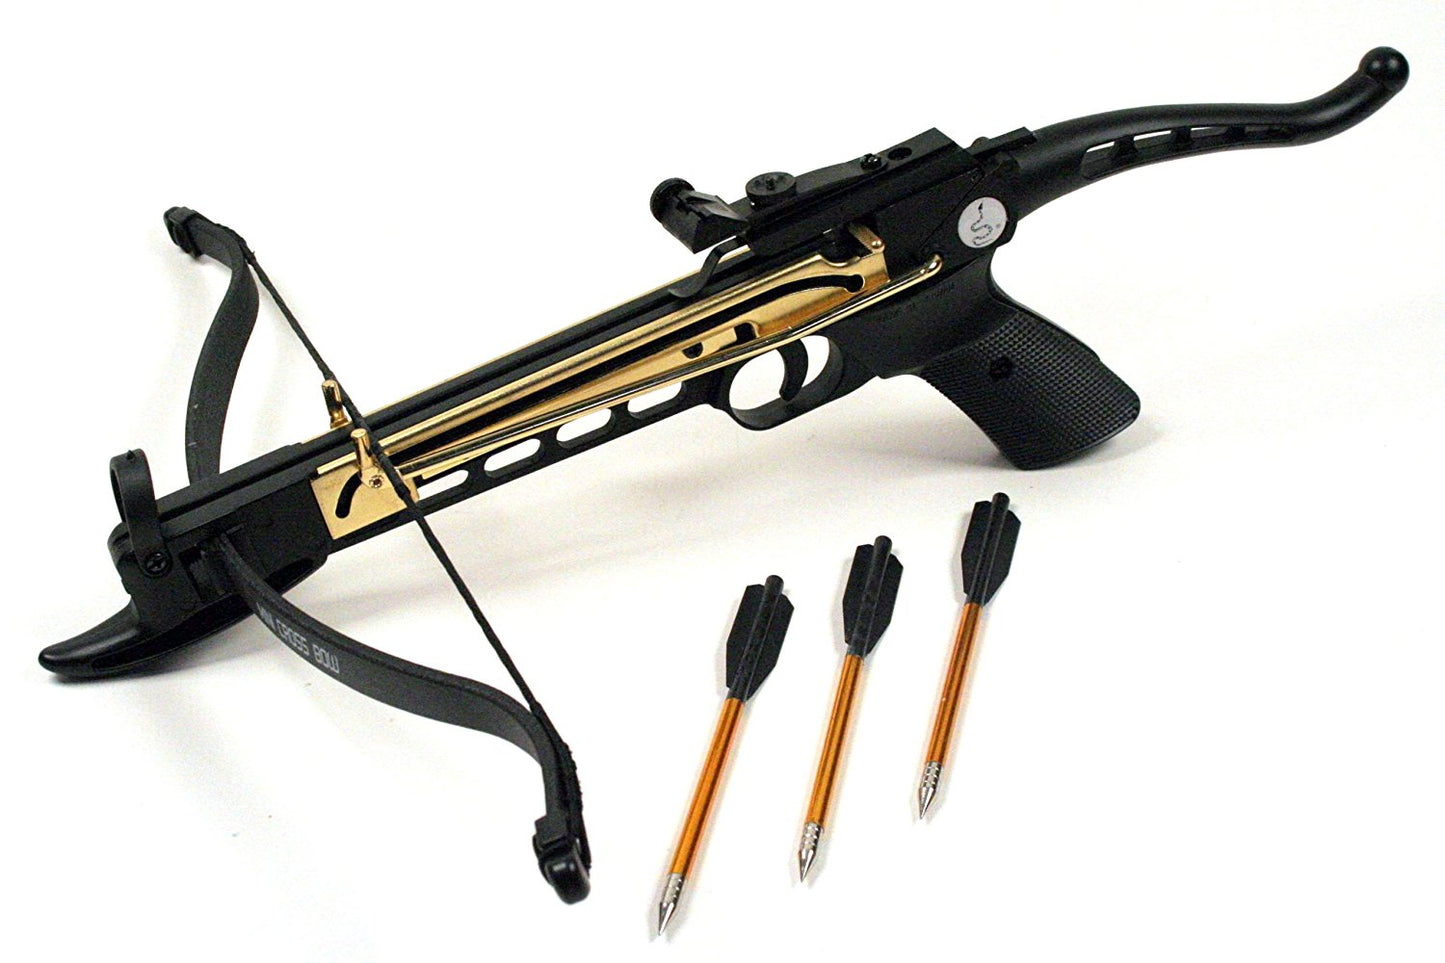 Ace Martial Arts Supply Self Cocking Draw Crossbow Pistol Set, 80-Pound